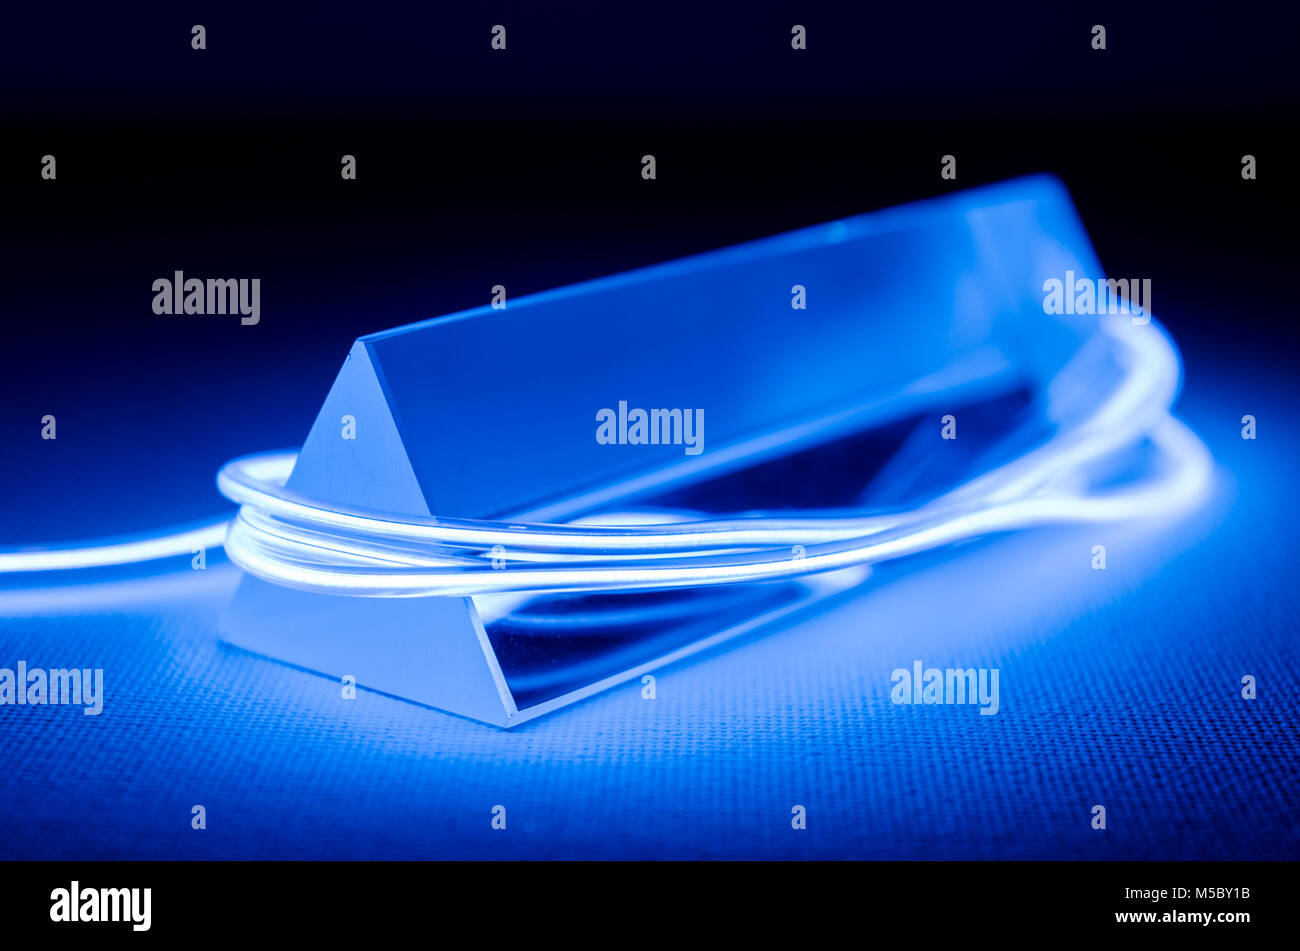 A Studio Still-life Photograph of a Triangular Glass Prism with Abstract Neon Lighting in Blue Stock Photo